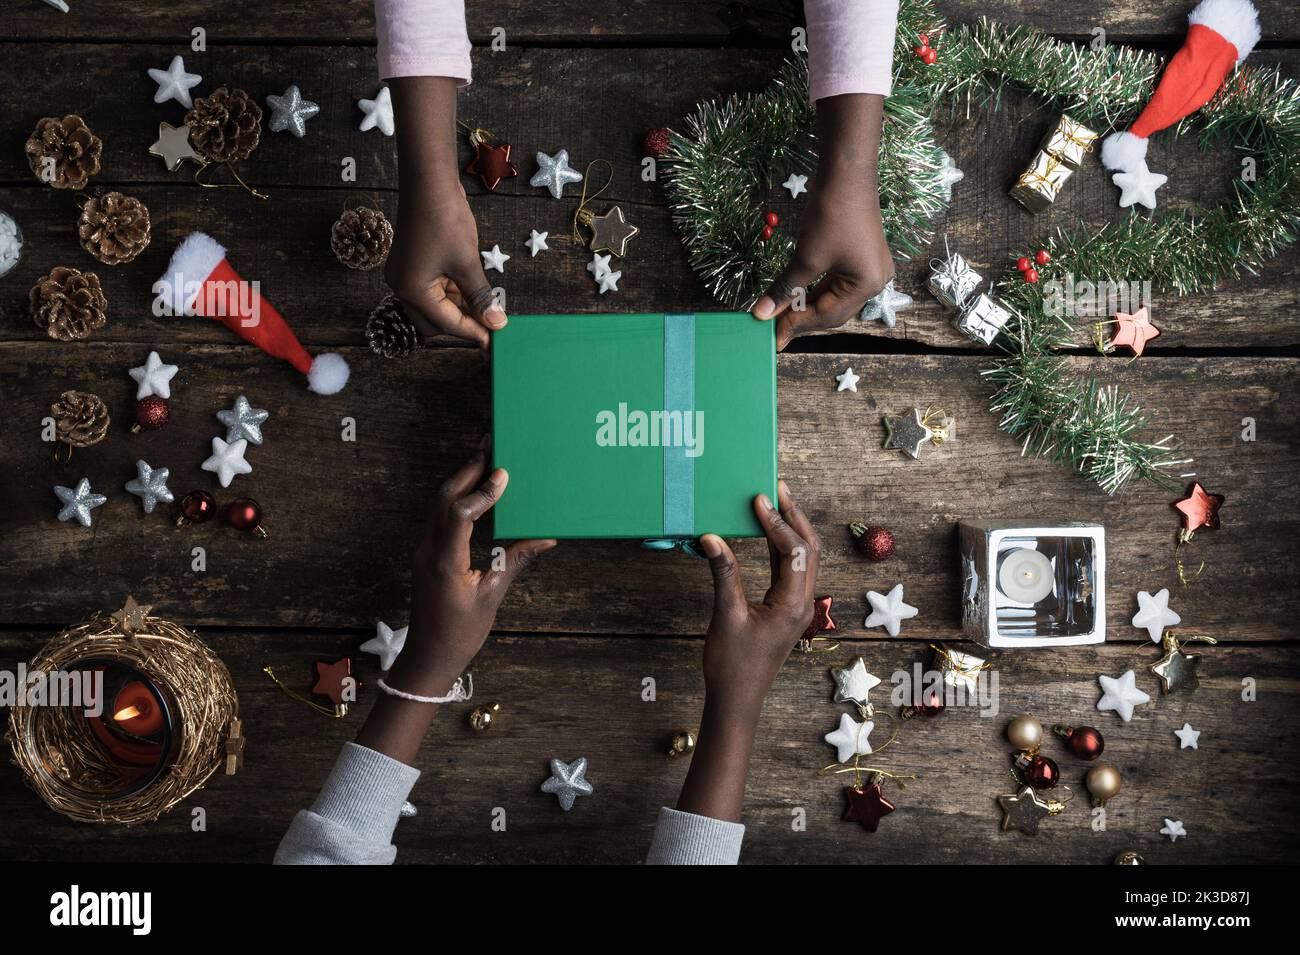 Top view of two coloured kids hands holding a green christmas holiday present box placed on a festive decorated wooden desk with stars, candles and ba Stock Photo